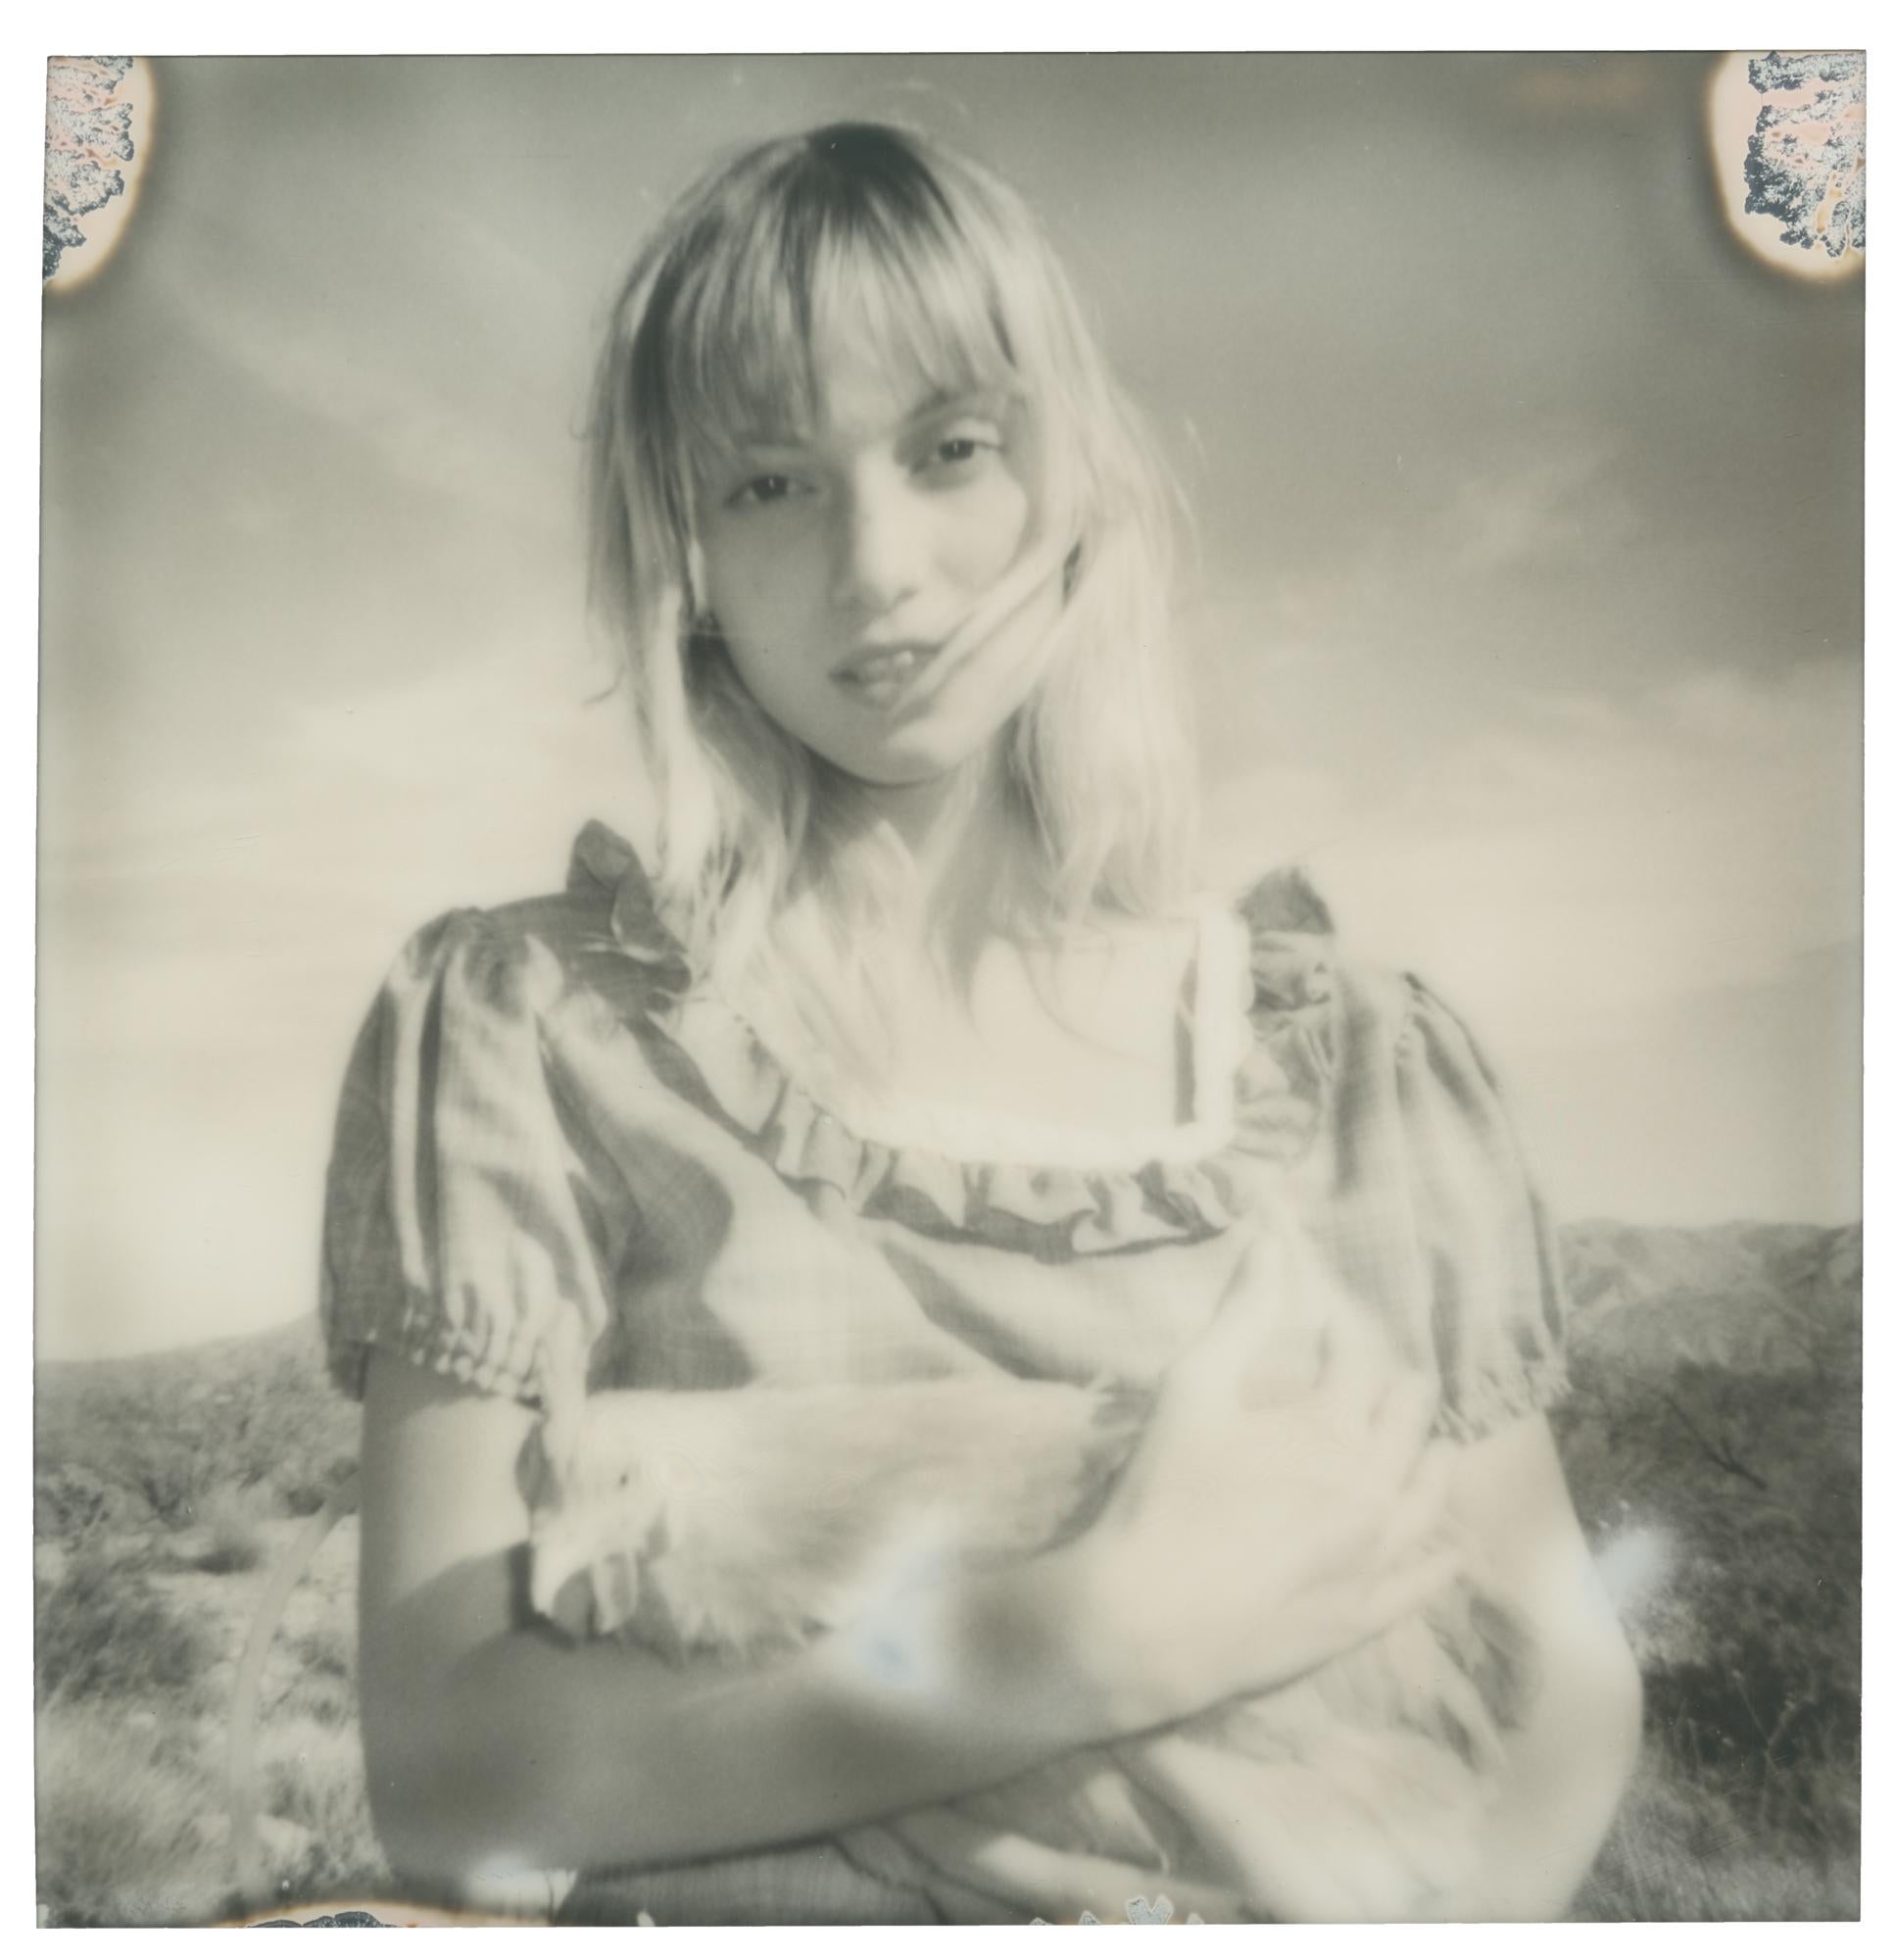 Love (Chicks and Chicks and sometimes Cocks) - Contemporary, Polaroid